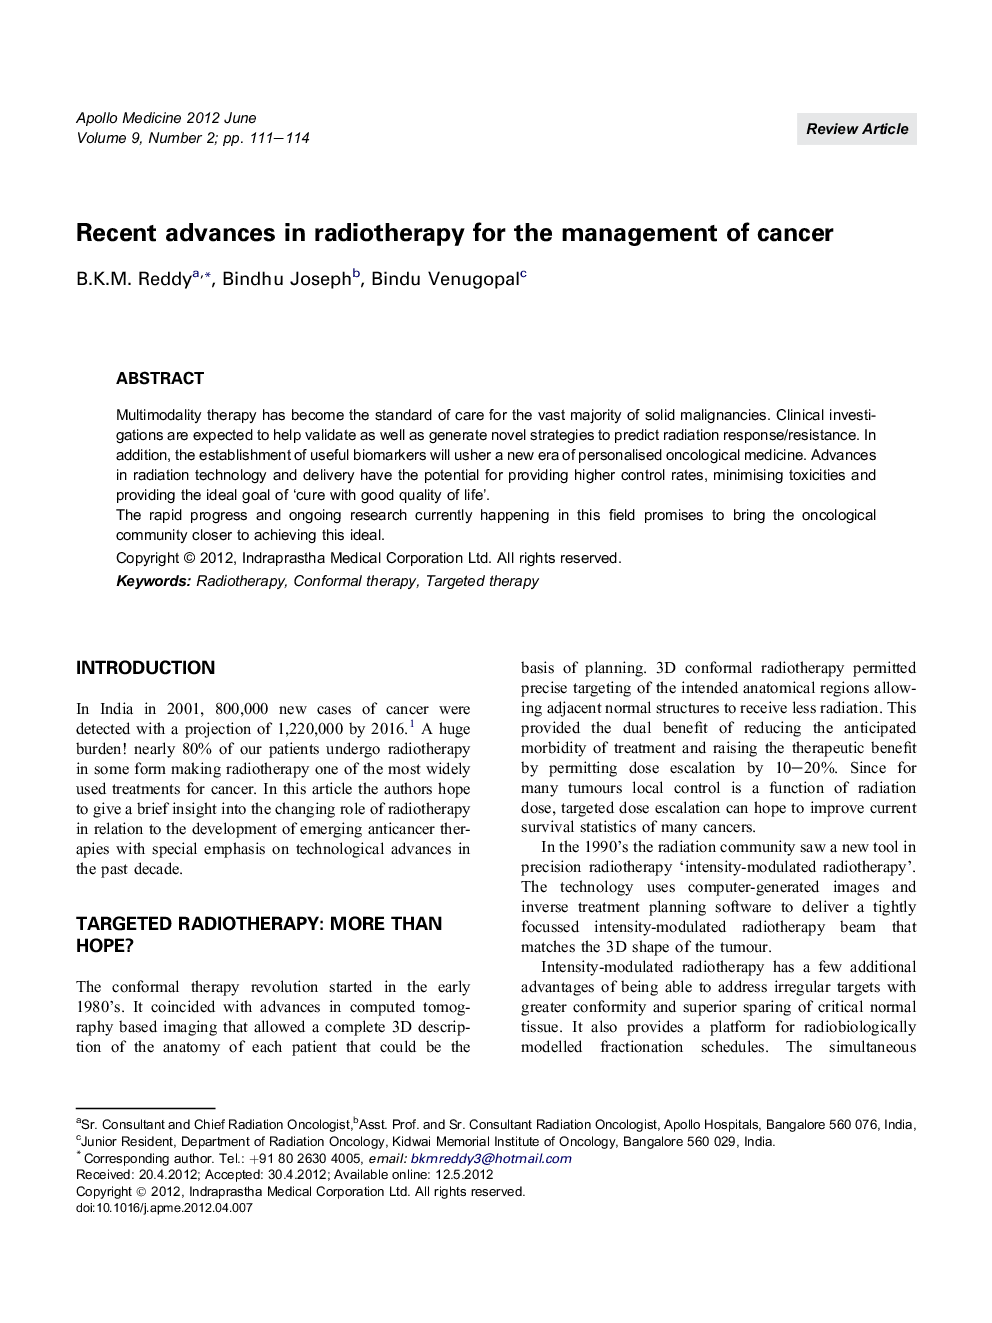 Recent advances in radiotherapy for the management of cancer